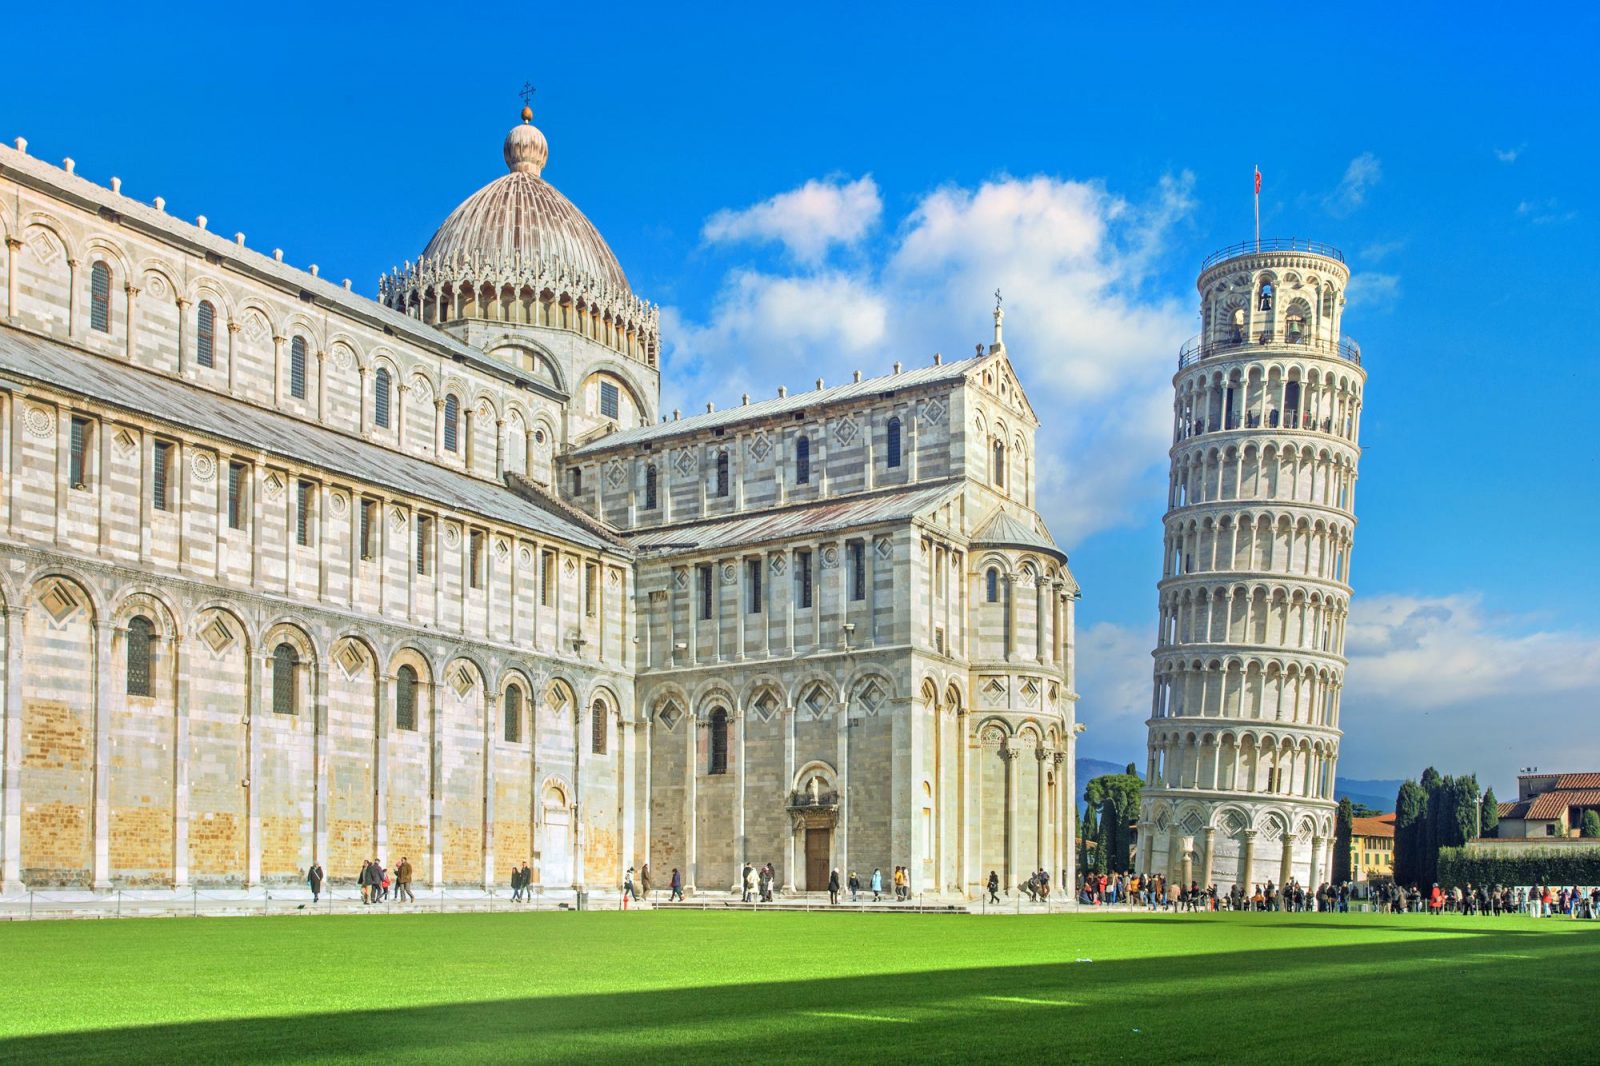 Second Most Famous Sights Leaning Tower Of Pisa, Italy